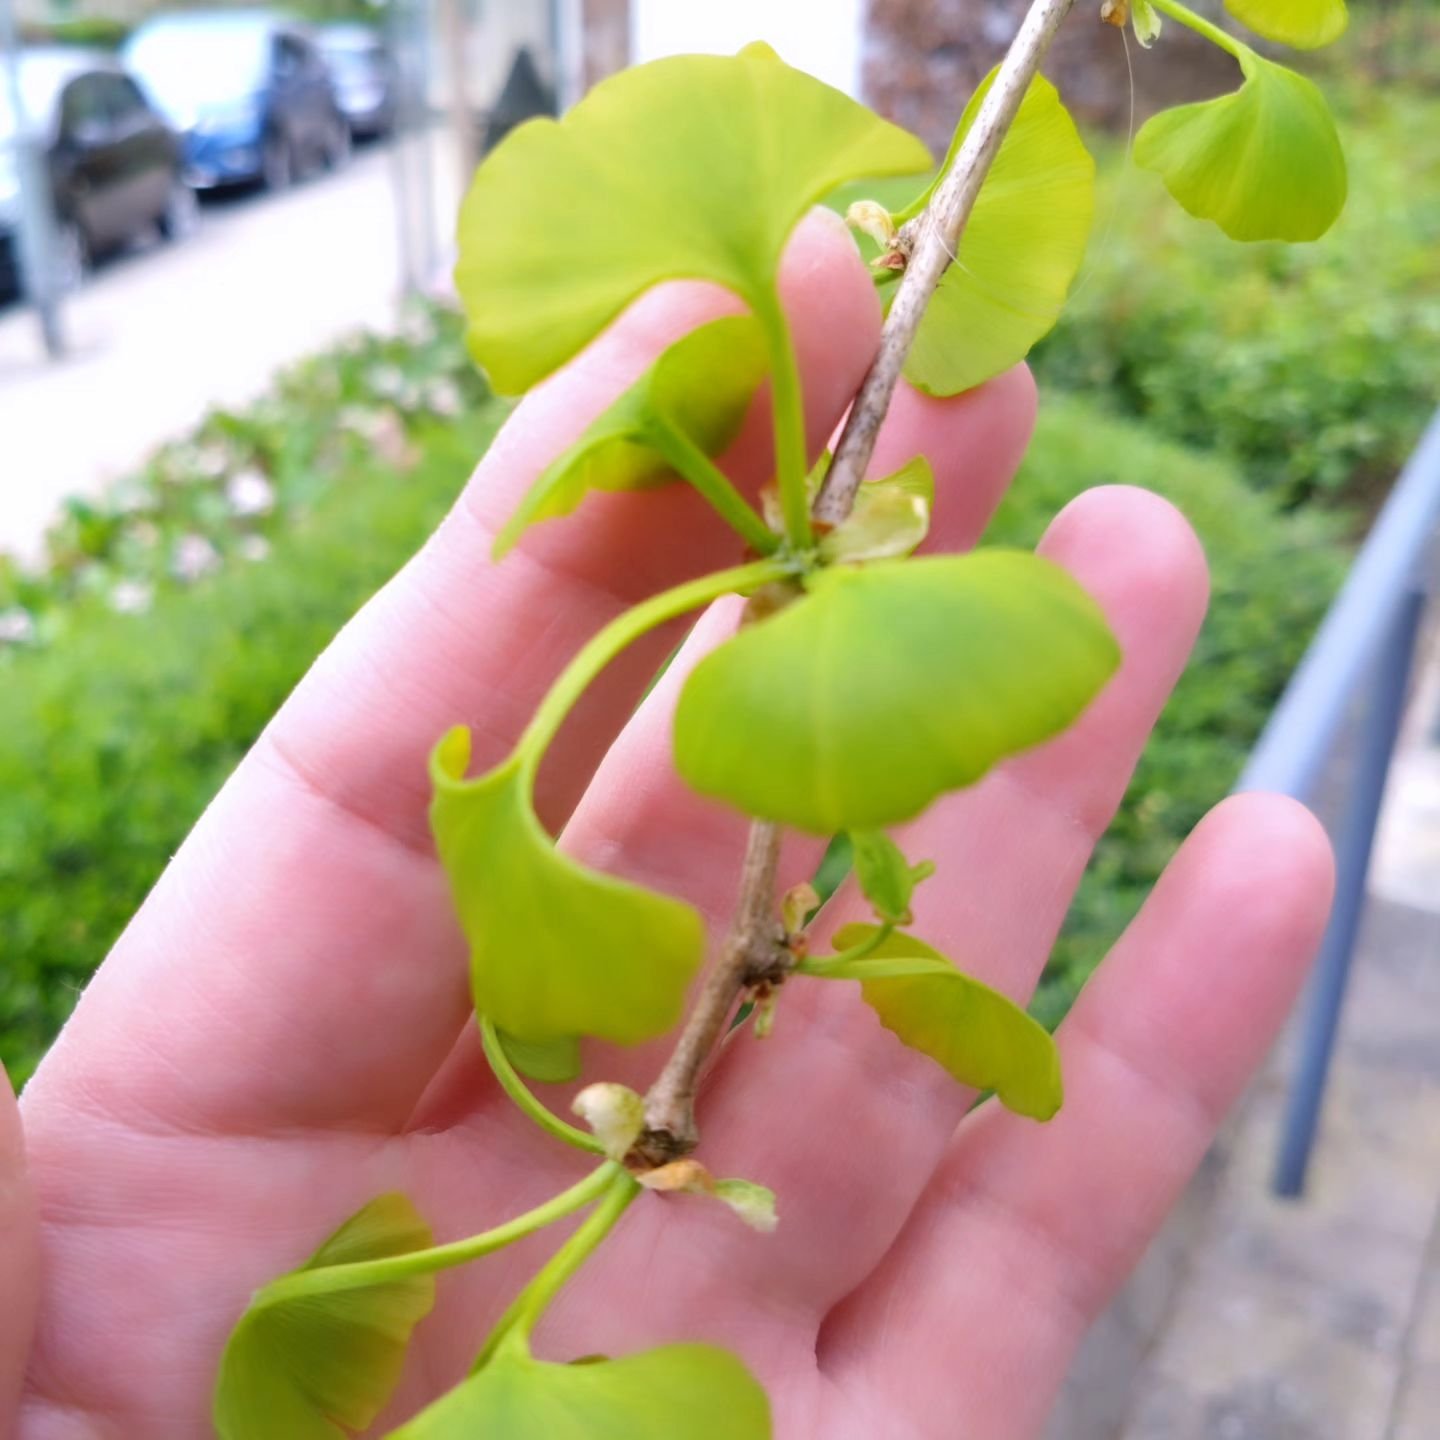 Ginkgo!

Just look at these small and beautifully formed green ginkgo leaves.

This morning I took my own advice and gazed up into the ginkgo trees at Southmead Hospital. 😁

These trees inspired the artwork I was commissioned to create last year and